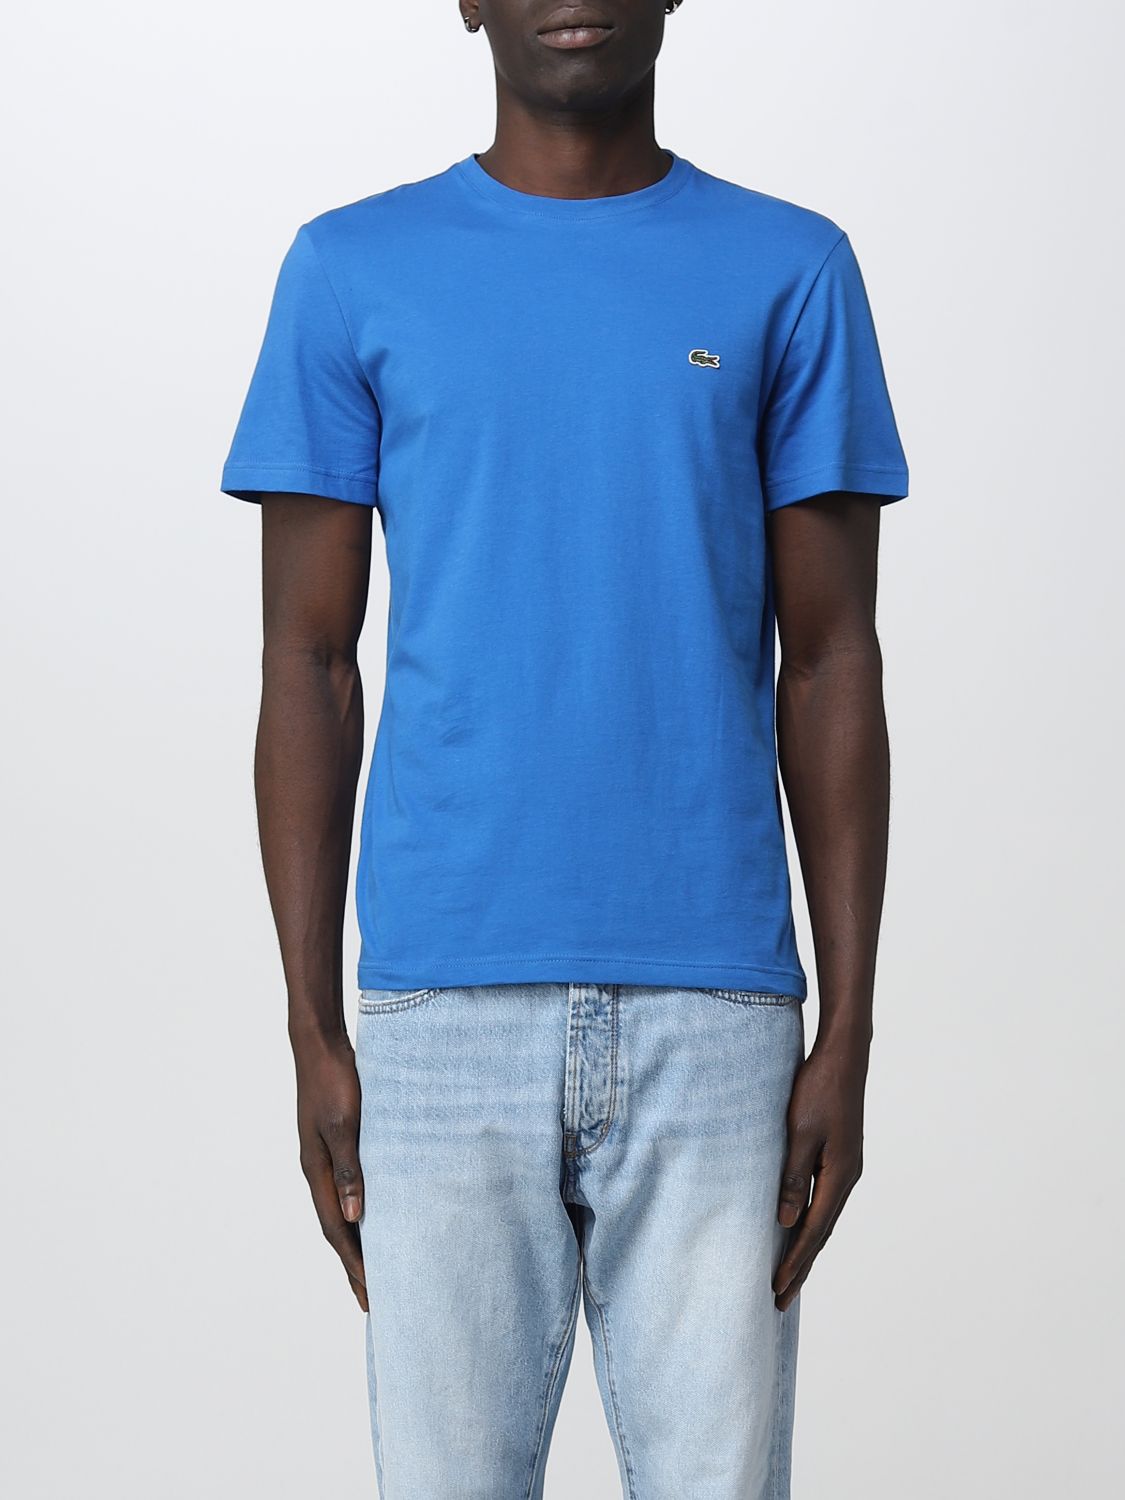 Lacoste T-shirt  Men In Gnawed Blue